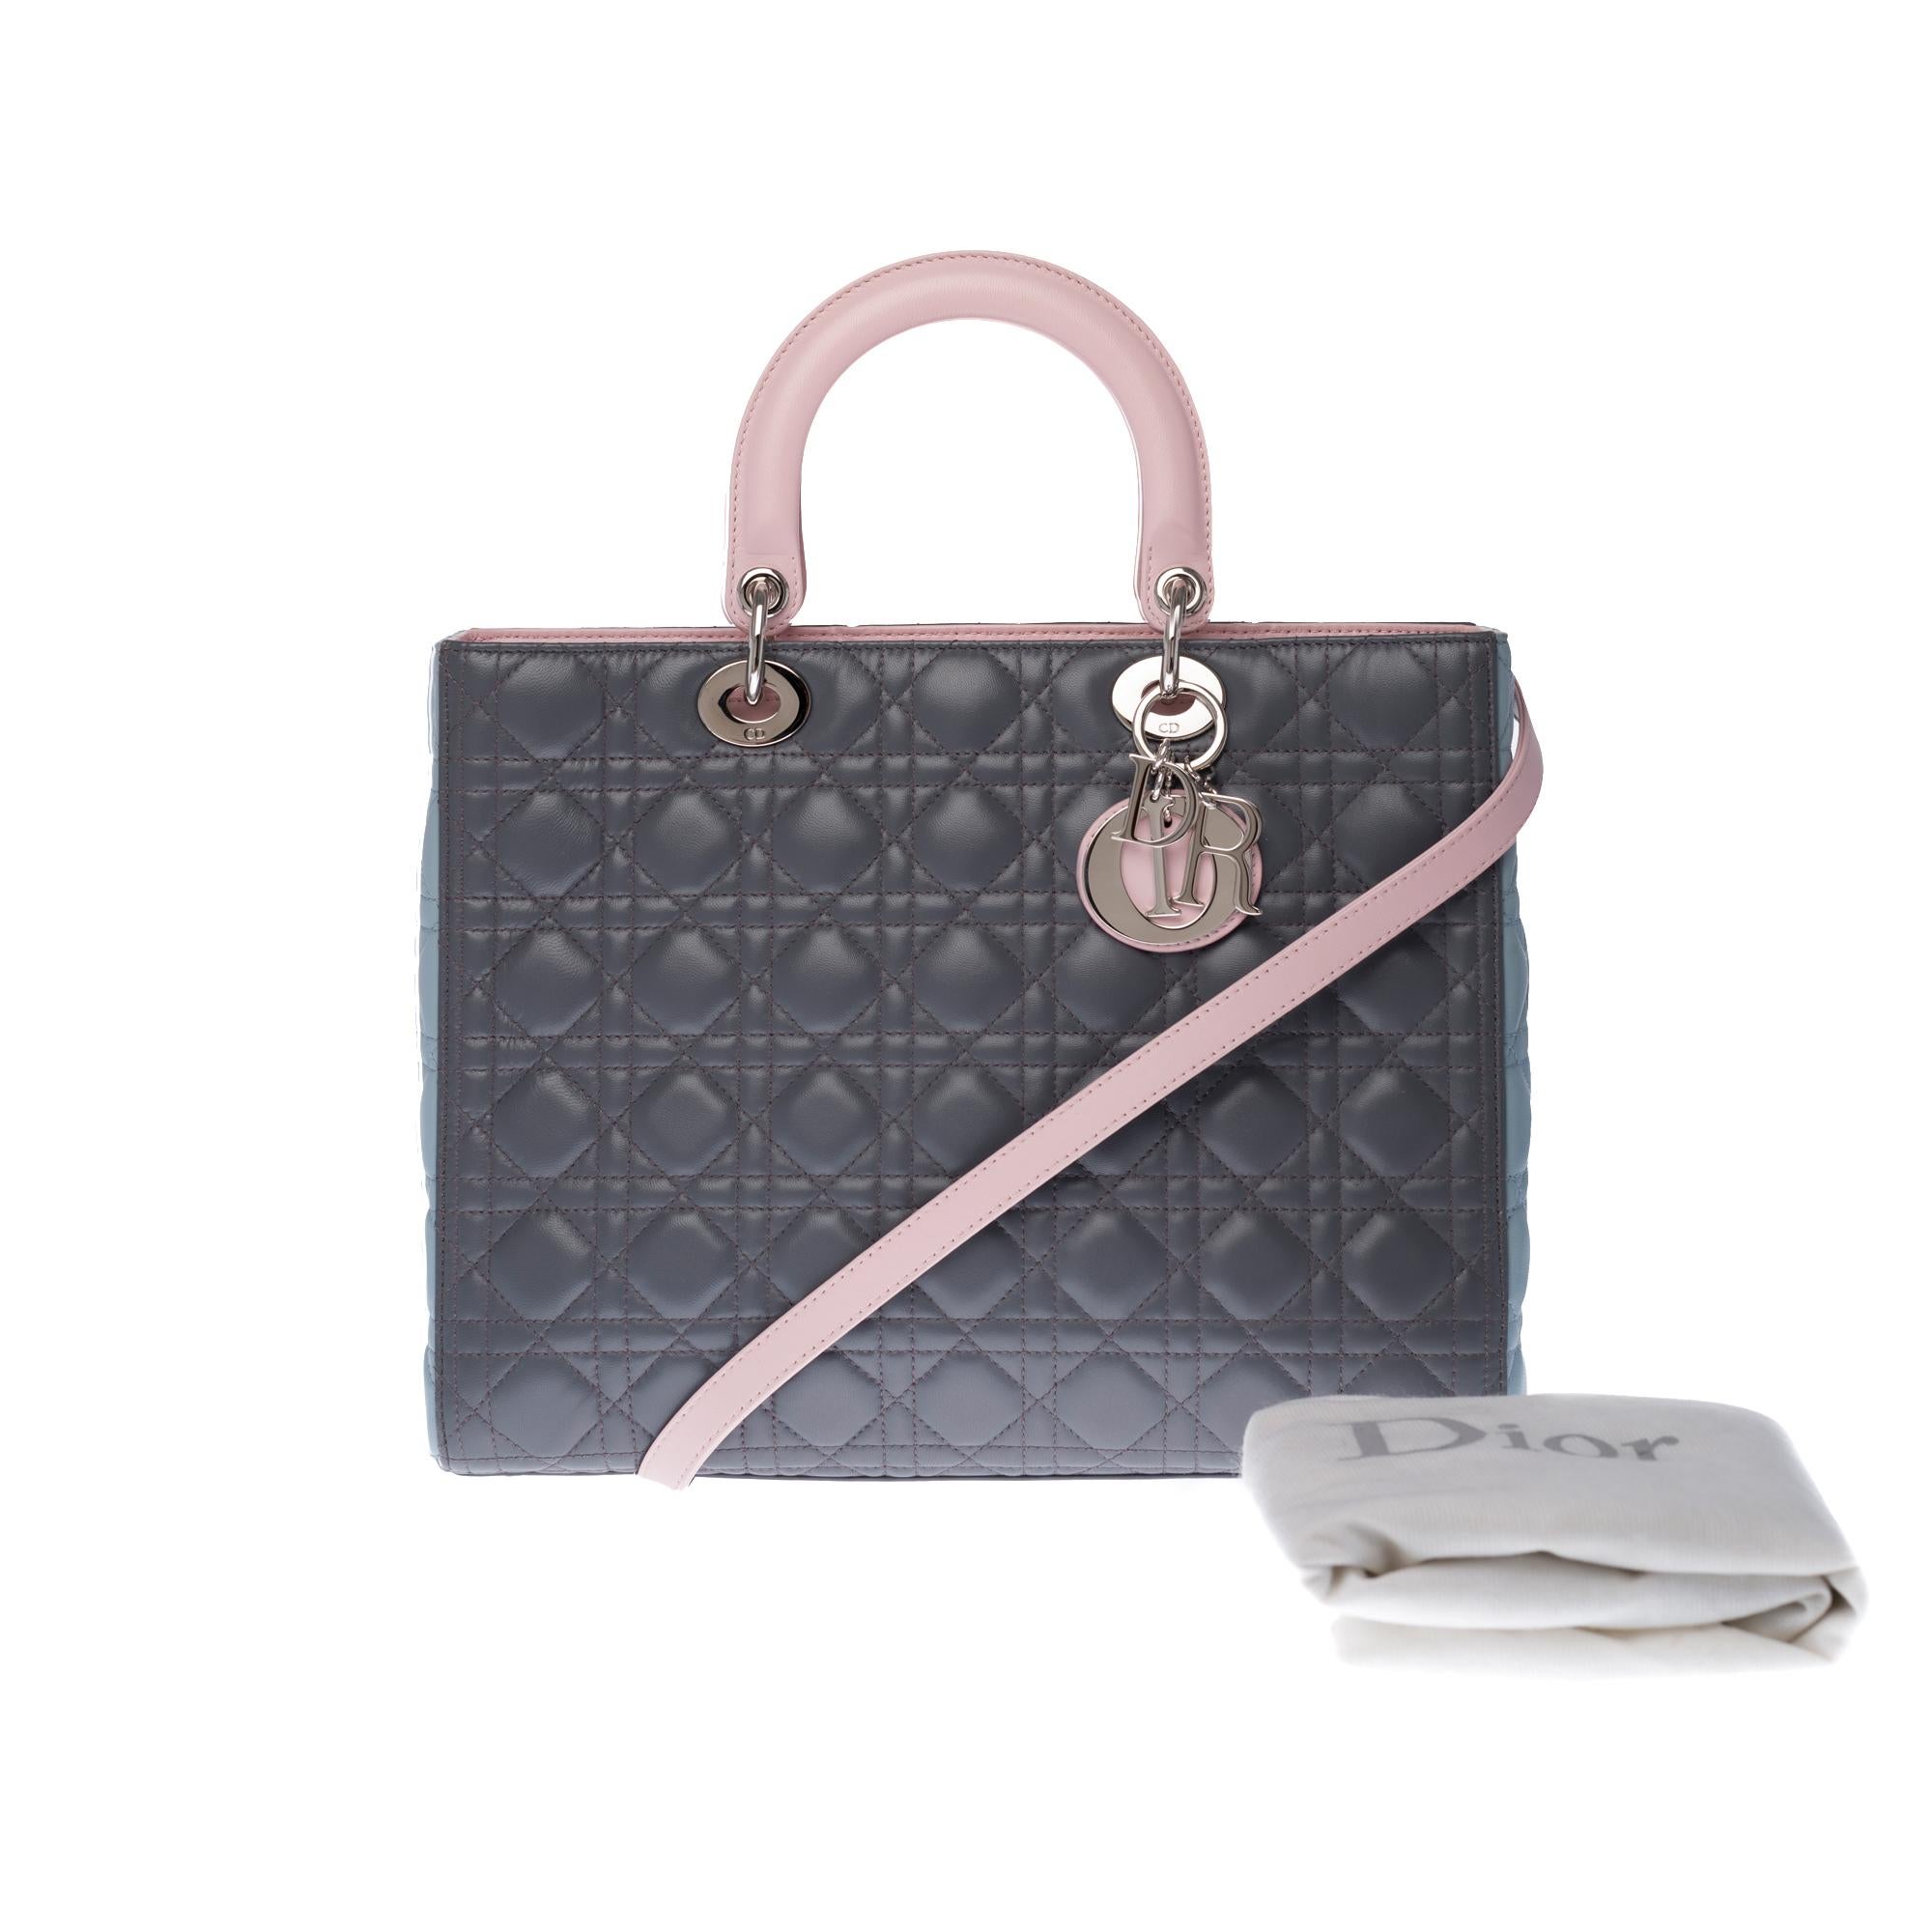 Limited Edition Lady Dior (GM) tricolor in grey, pink, and turquoise leather, SHW 3